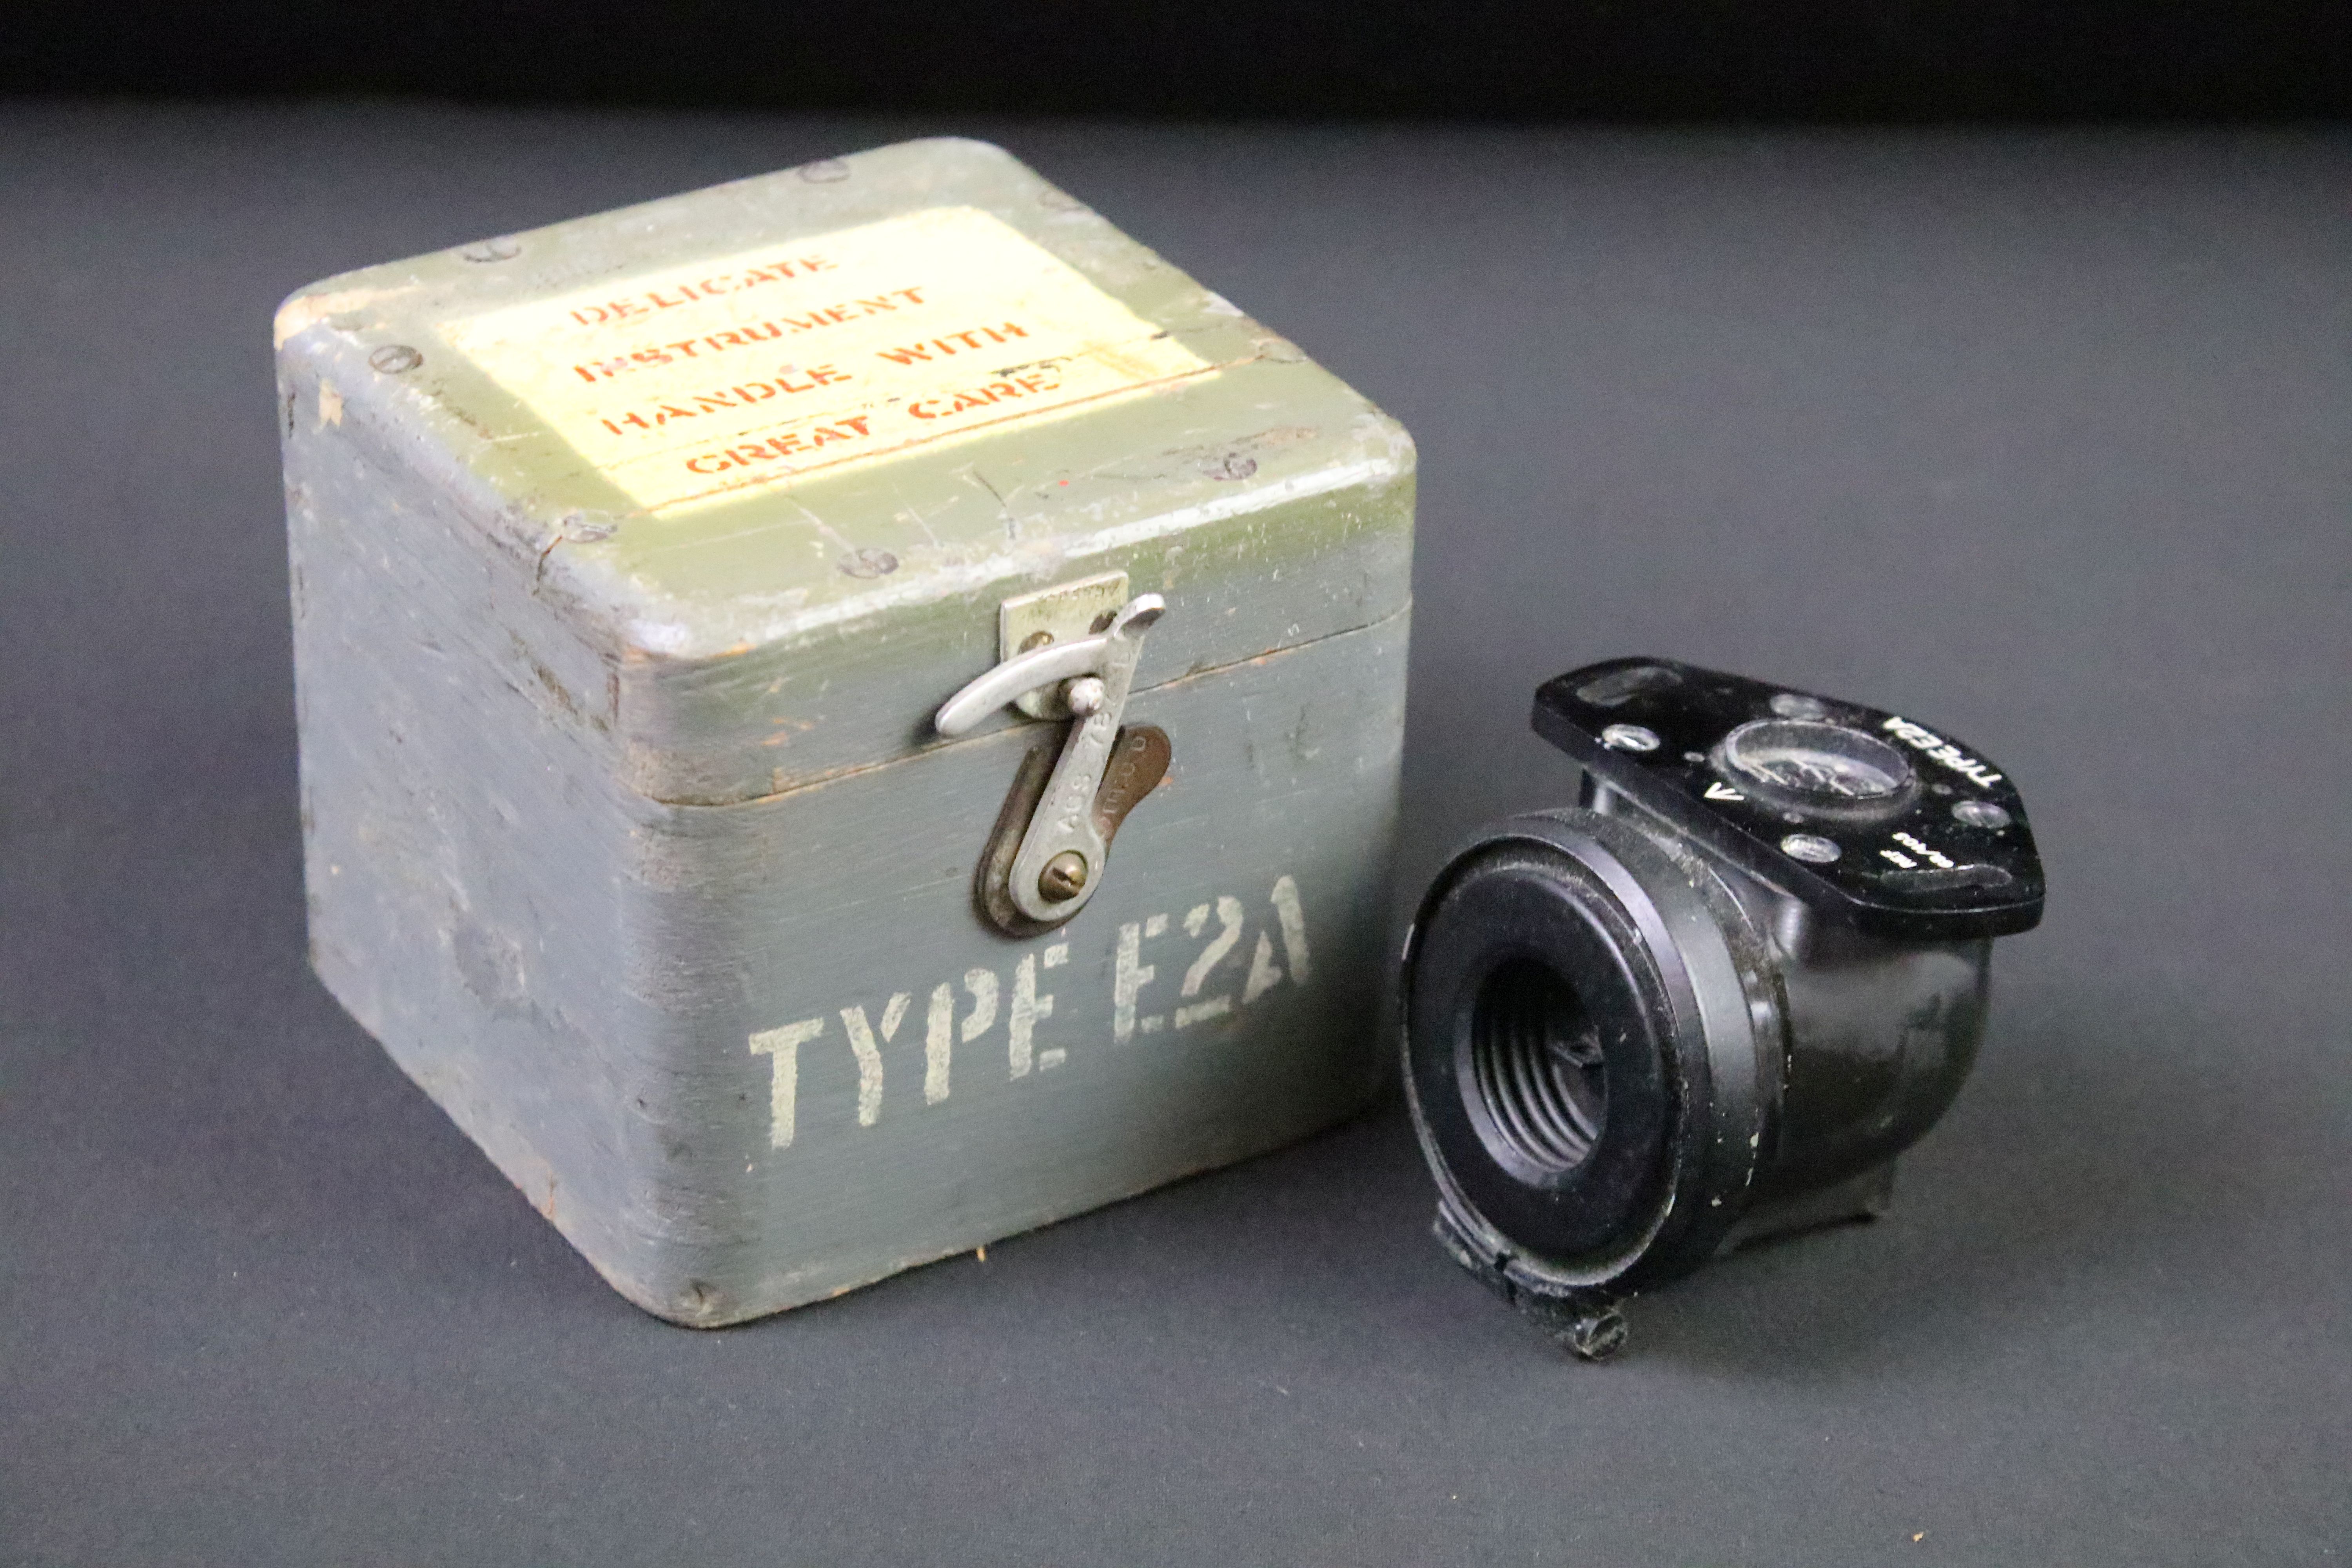 A British military issued RAF / Air Ministry aircraft Type E2A compass within fitted wooden box.